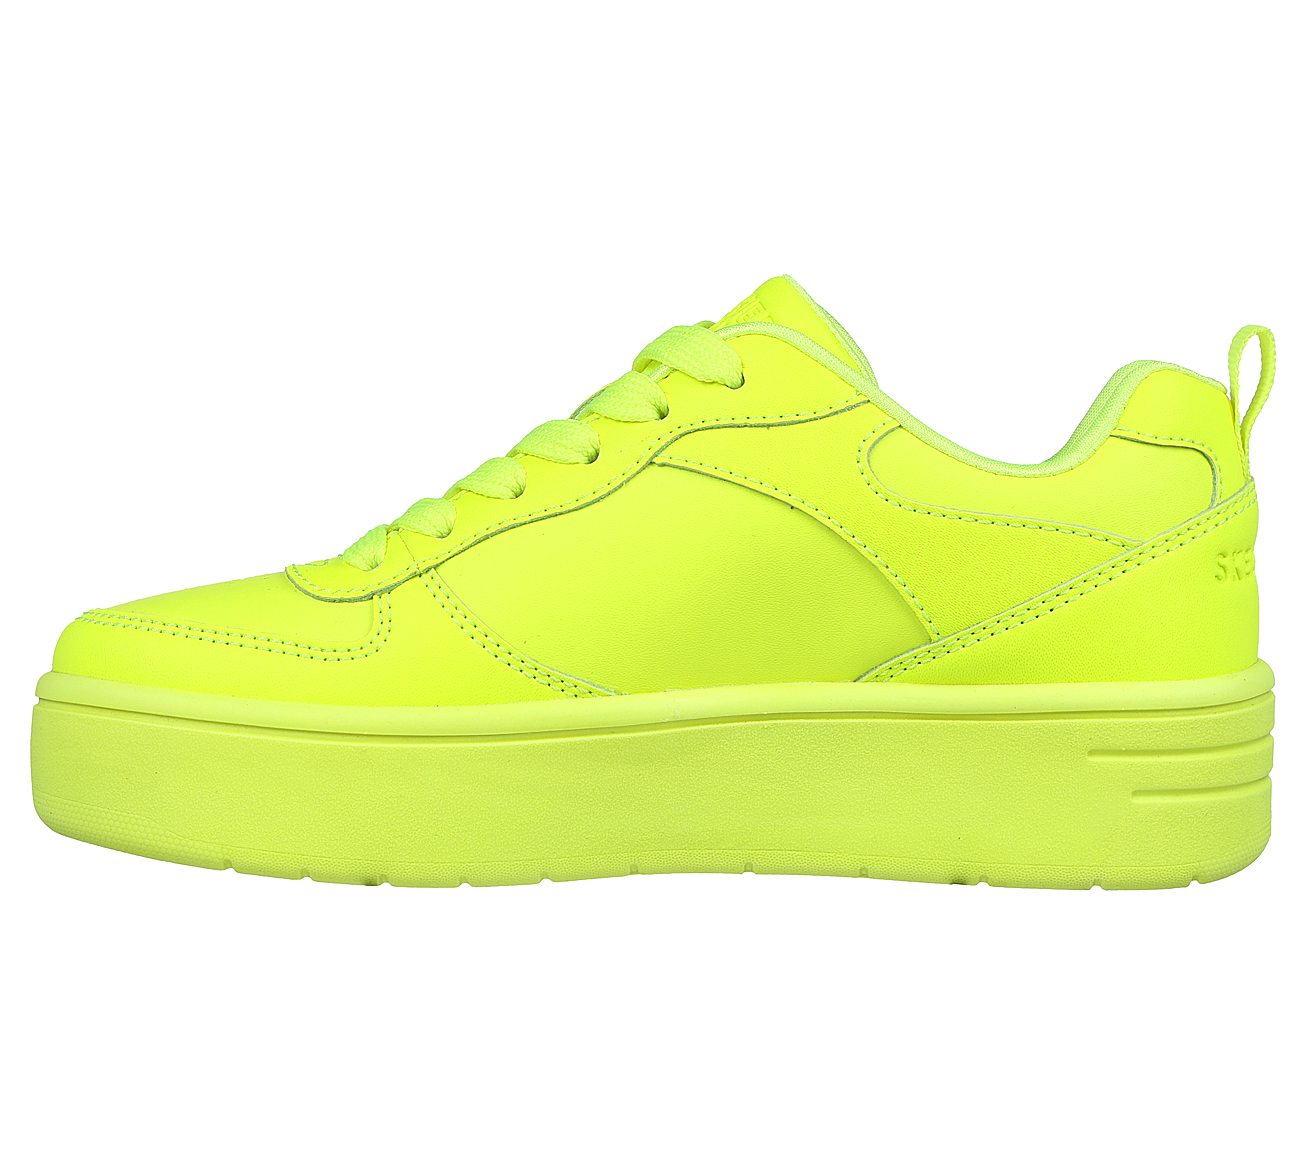 COURT HIGH - COLOR ZONE, NEON/YELLOW Footwear Left View